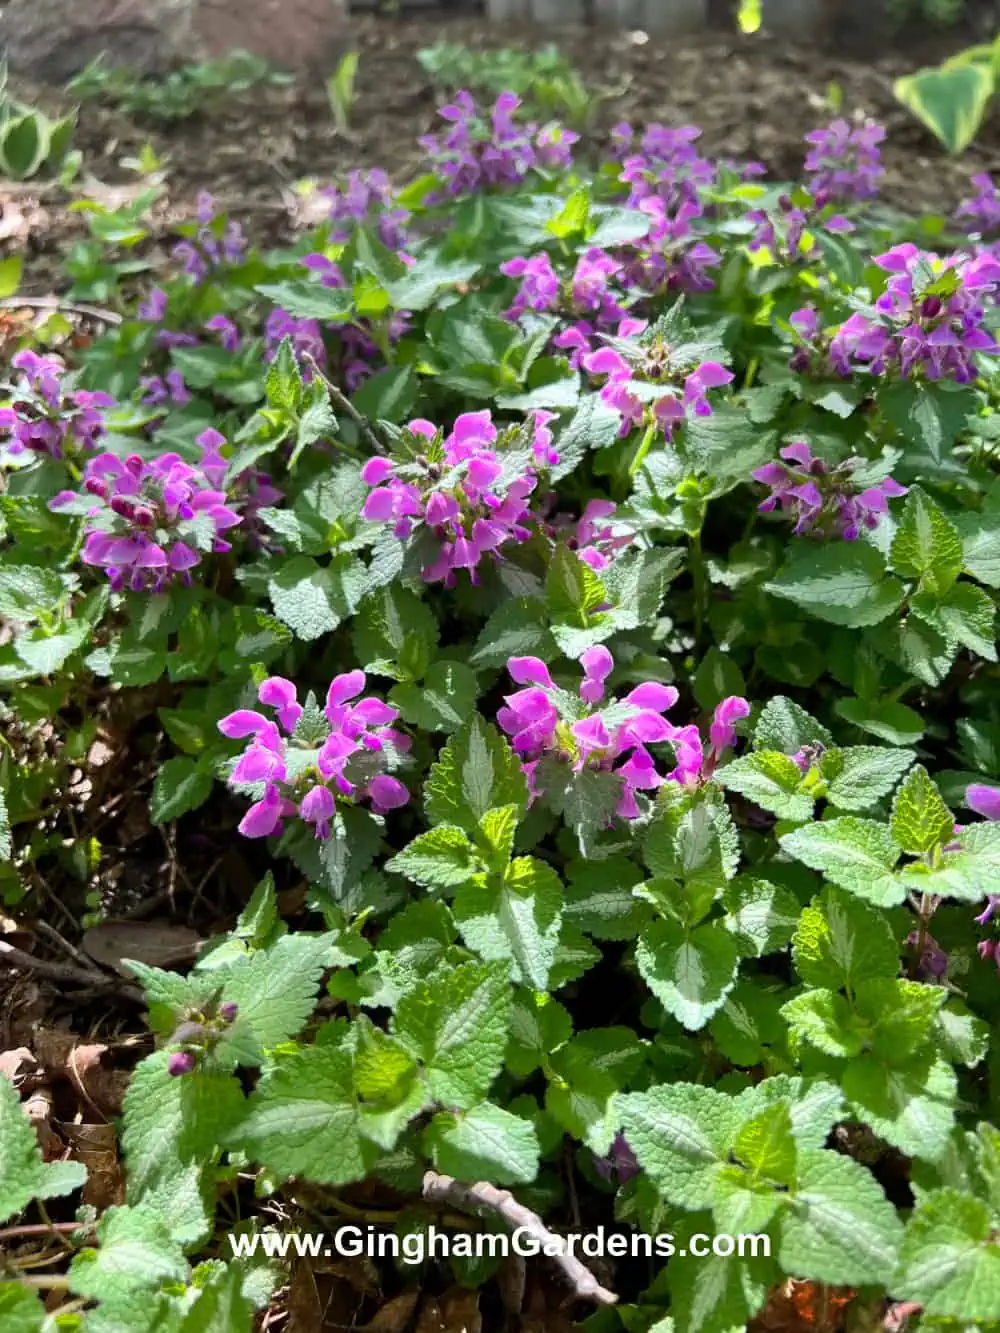 Lamium groundcover with violet flowers